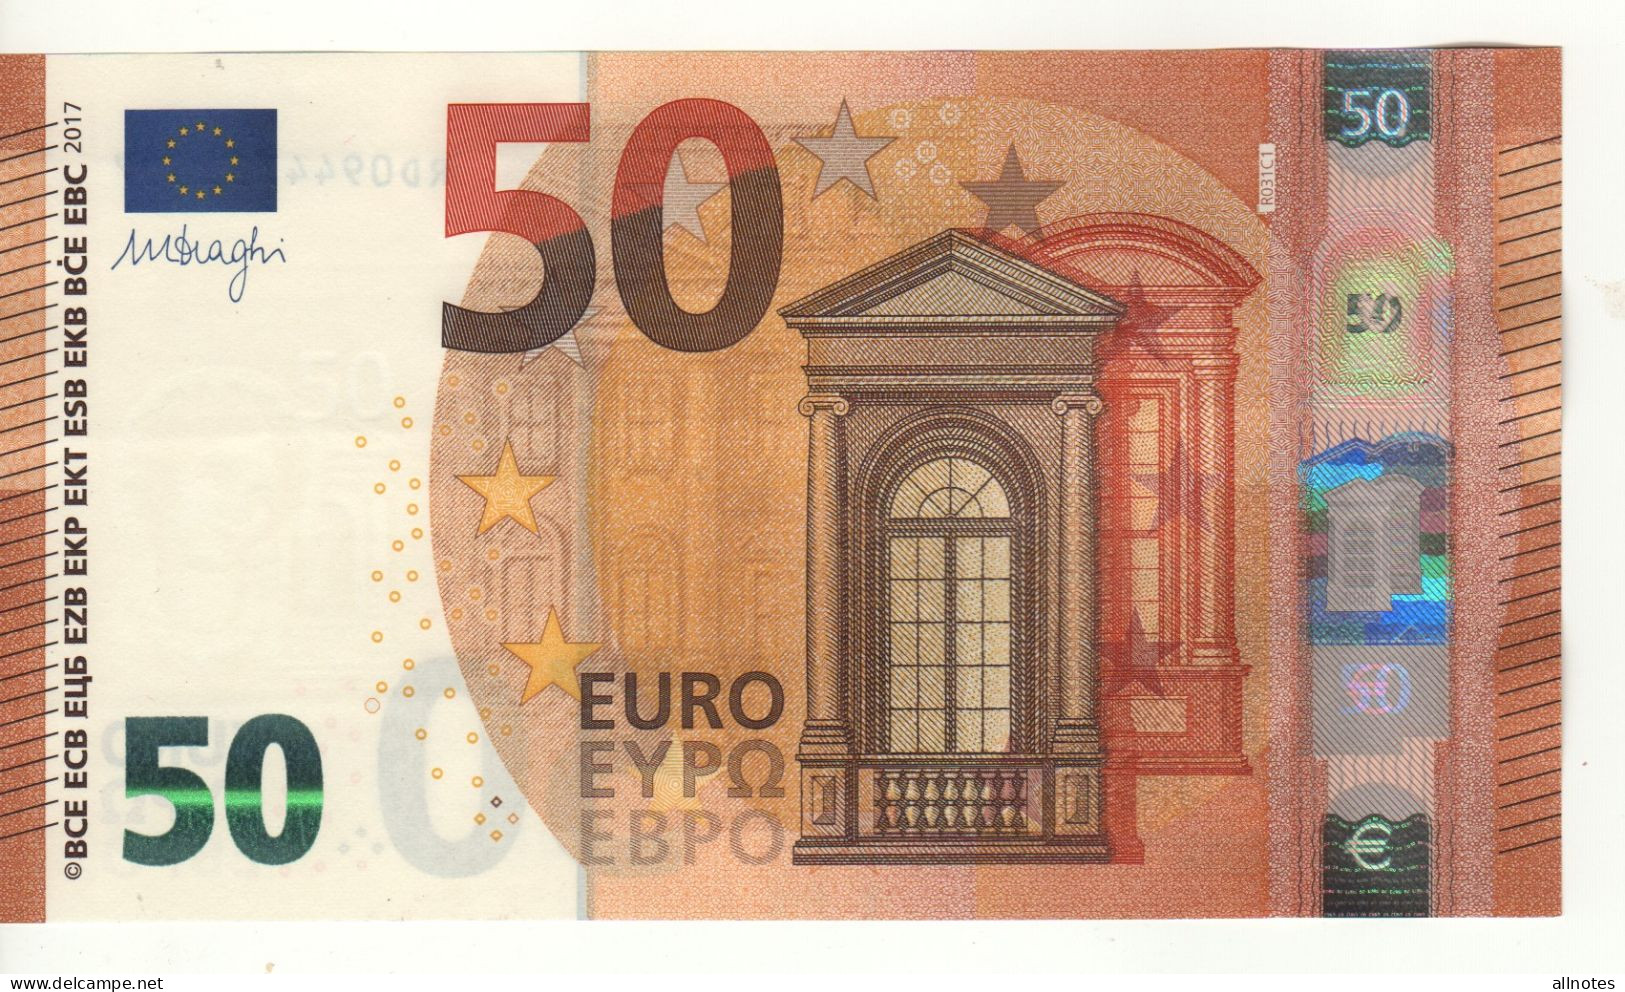 50 EURO   Firma  DRAGHI   R 031 C1   RD0944722443  /  FDS - UNC - 50 Euro